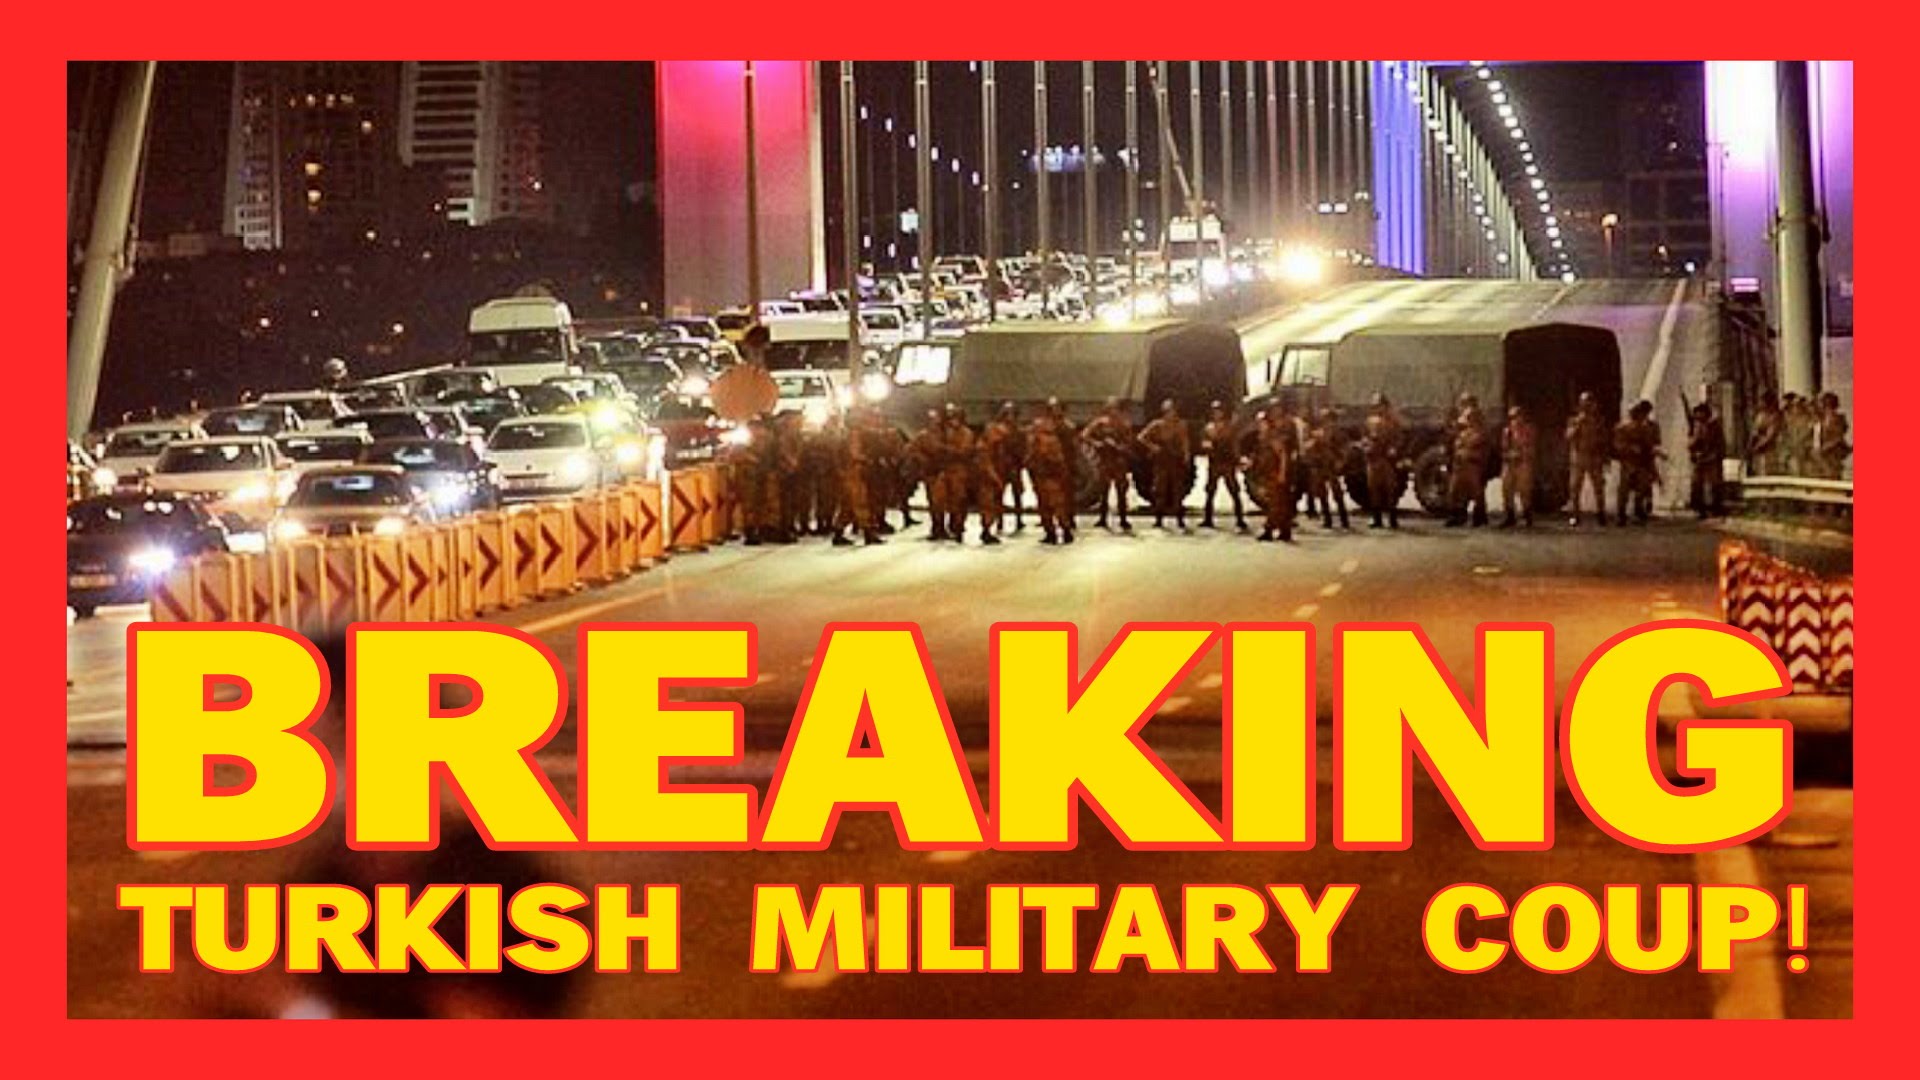 BREAKING: ‘We’ve taken control!’ Military claim coup in Turkey as they open fire on citizens